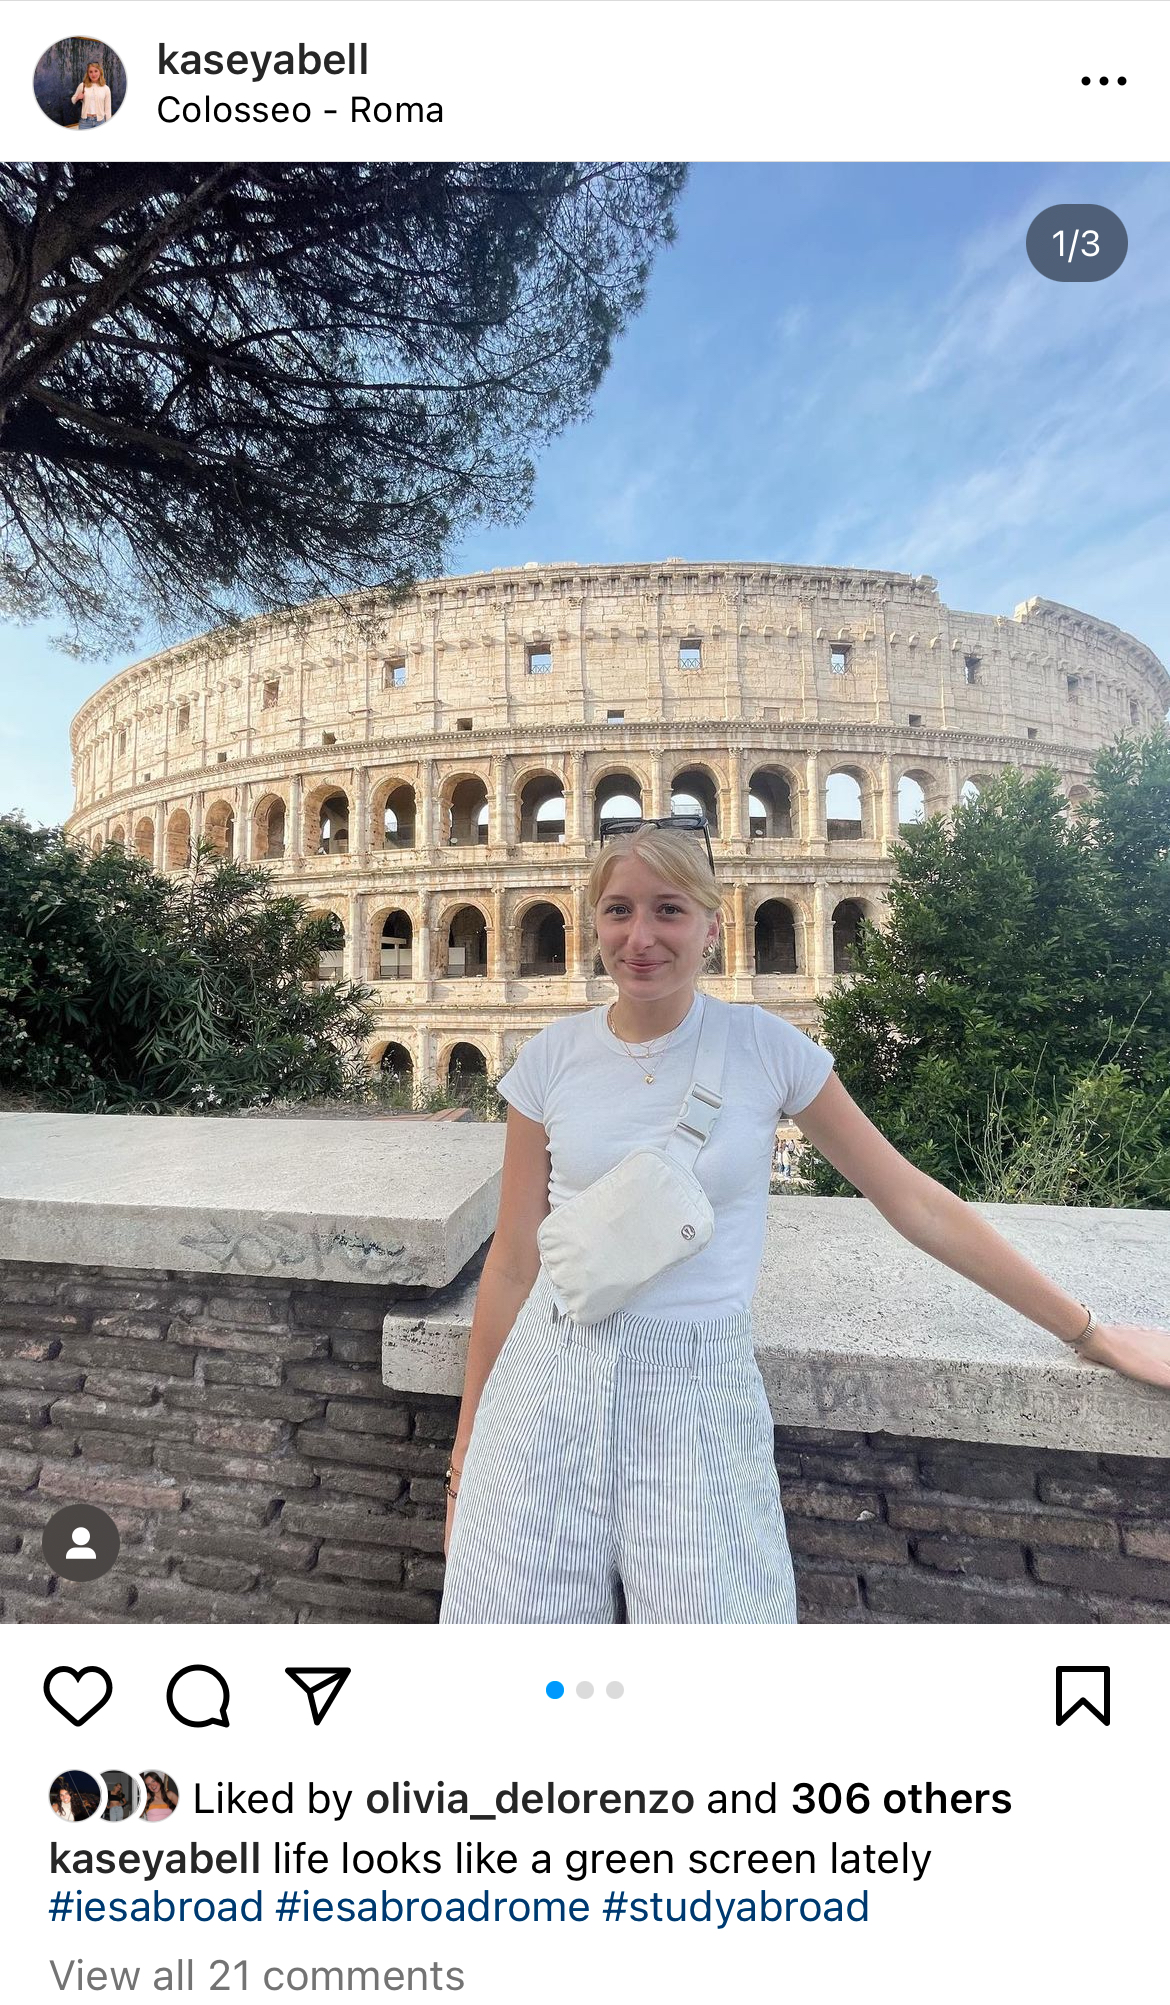 This instagram post depicts a young white blonde girl standing in front of the colloseum in Rome. She is wearing a white tee shirt and pin striped cream shorts. She has sunglasses on her head and her hair in a ponytail